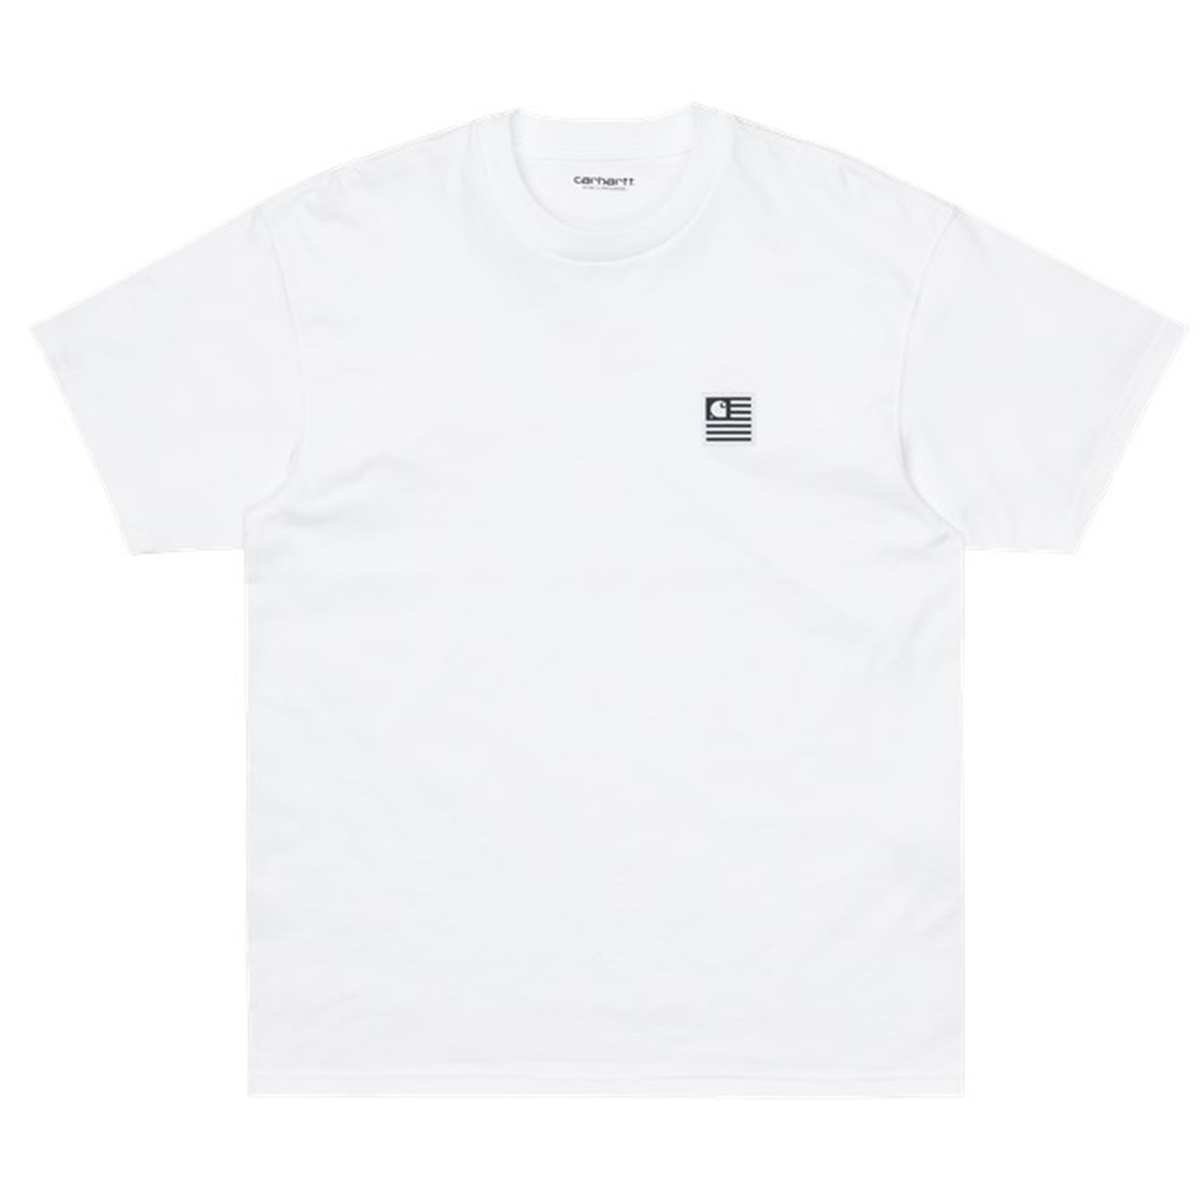 S/S Label State T-Shirt